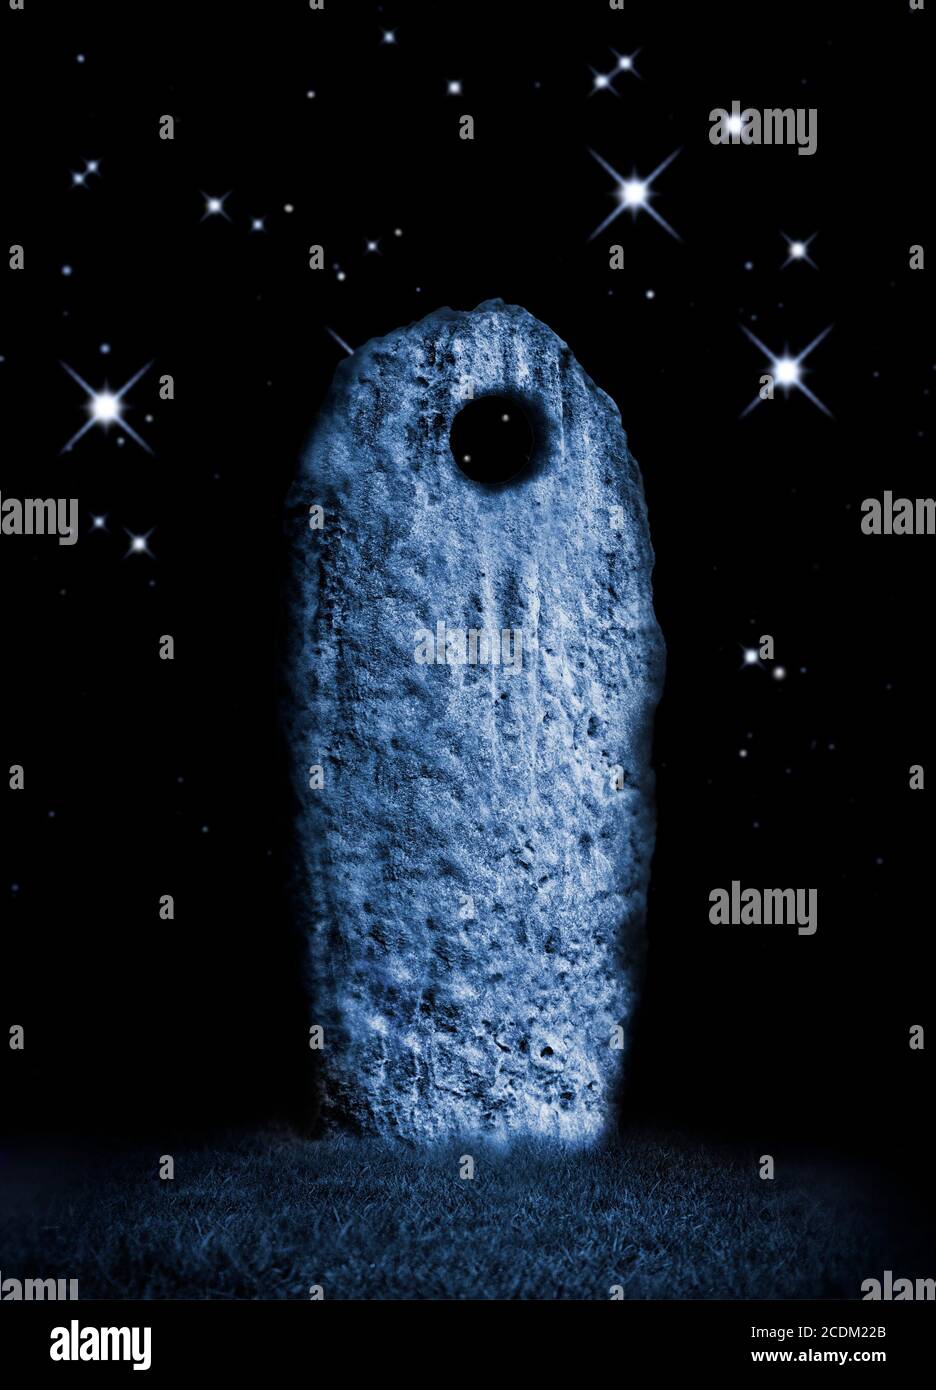 Stars and standing stone, illustration. Stock Photo